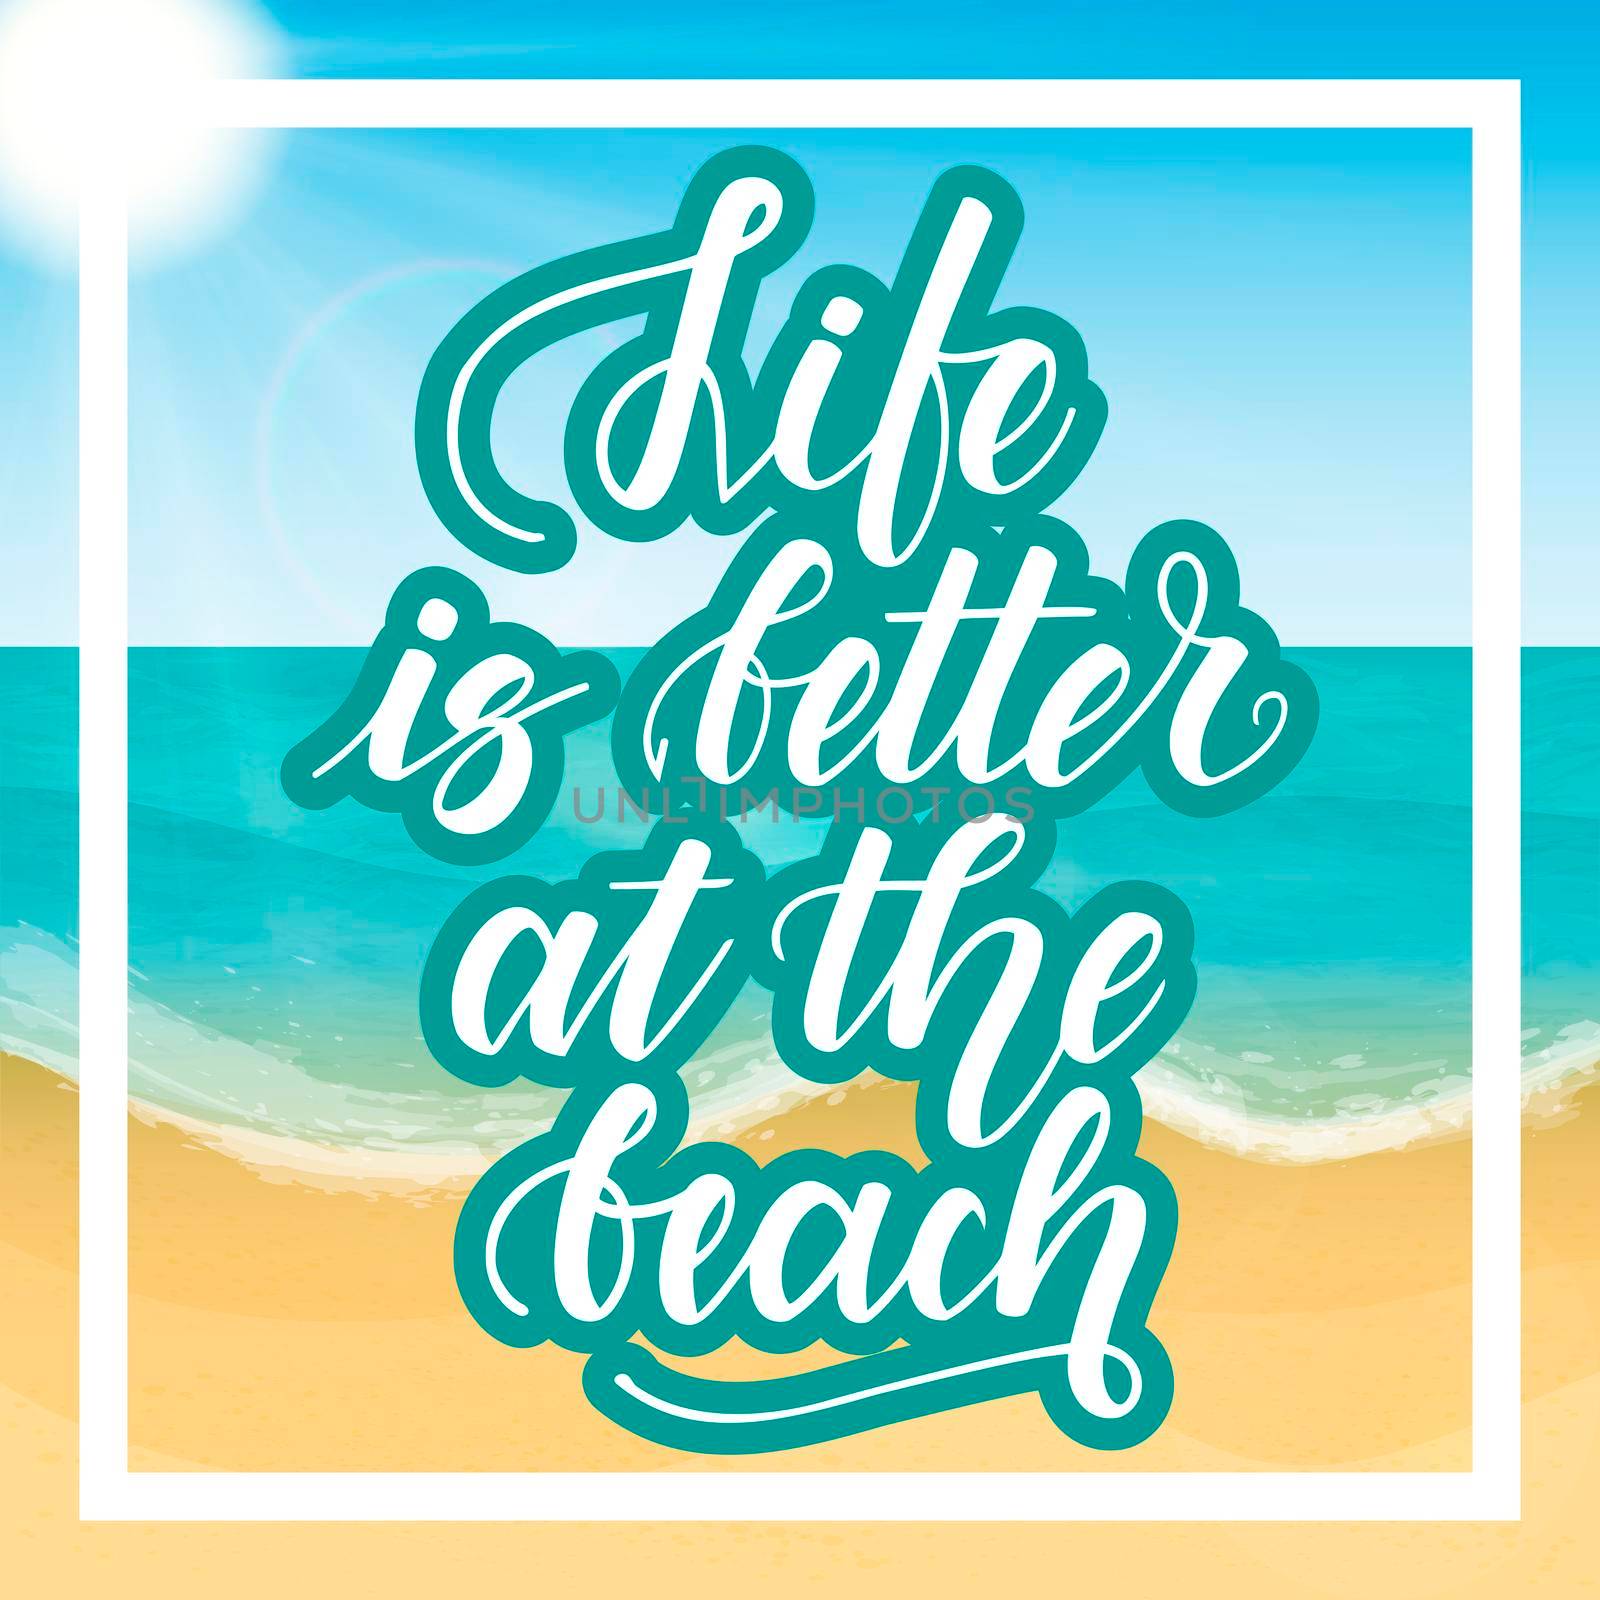 Life is better at the beach. Handwritten lettering against the background of the sea beach. illustration.